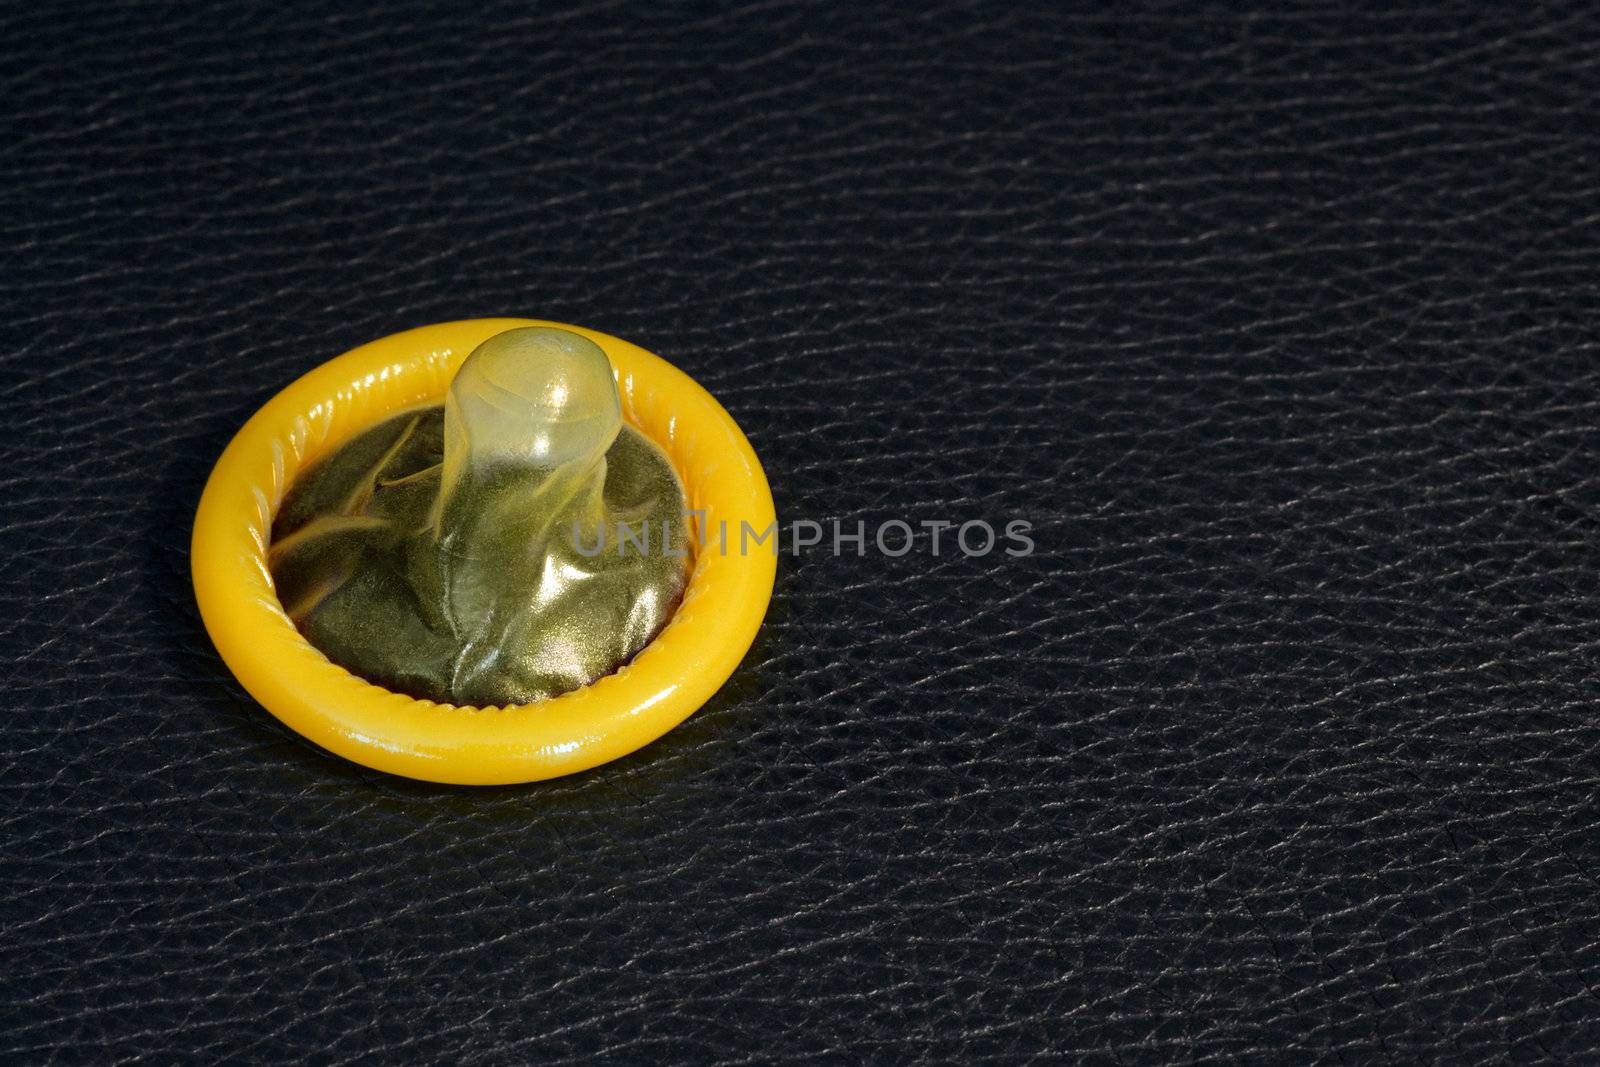 Image of a yellow condom on black leather.
